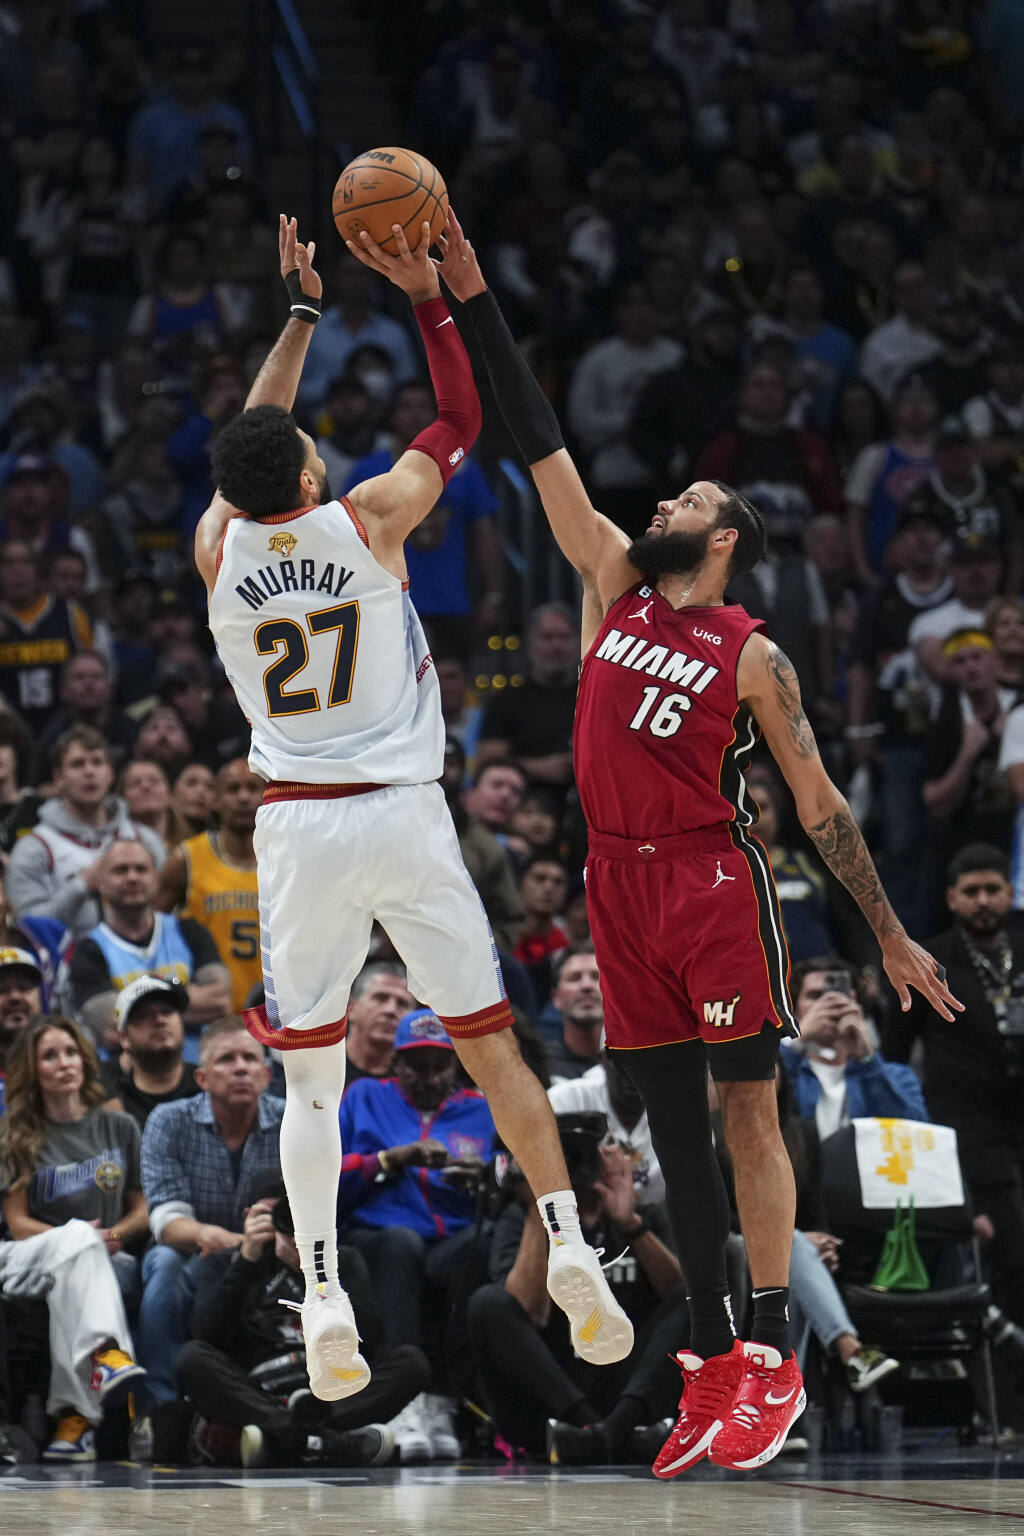 Denver Nuggets take home first NBA title with win over Miami Heat, Basketball News